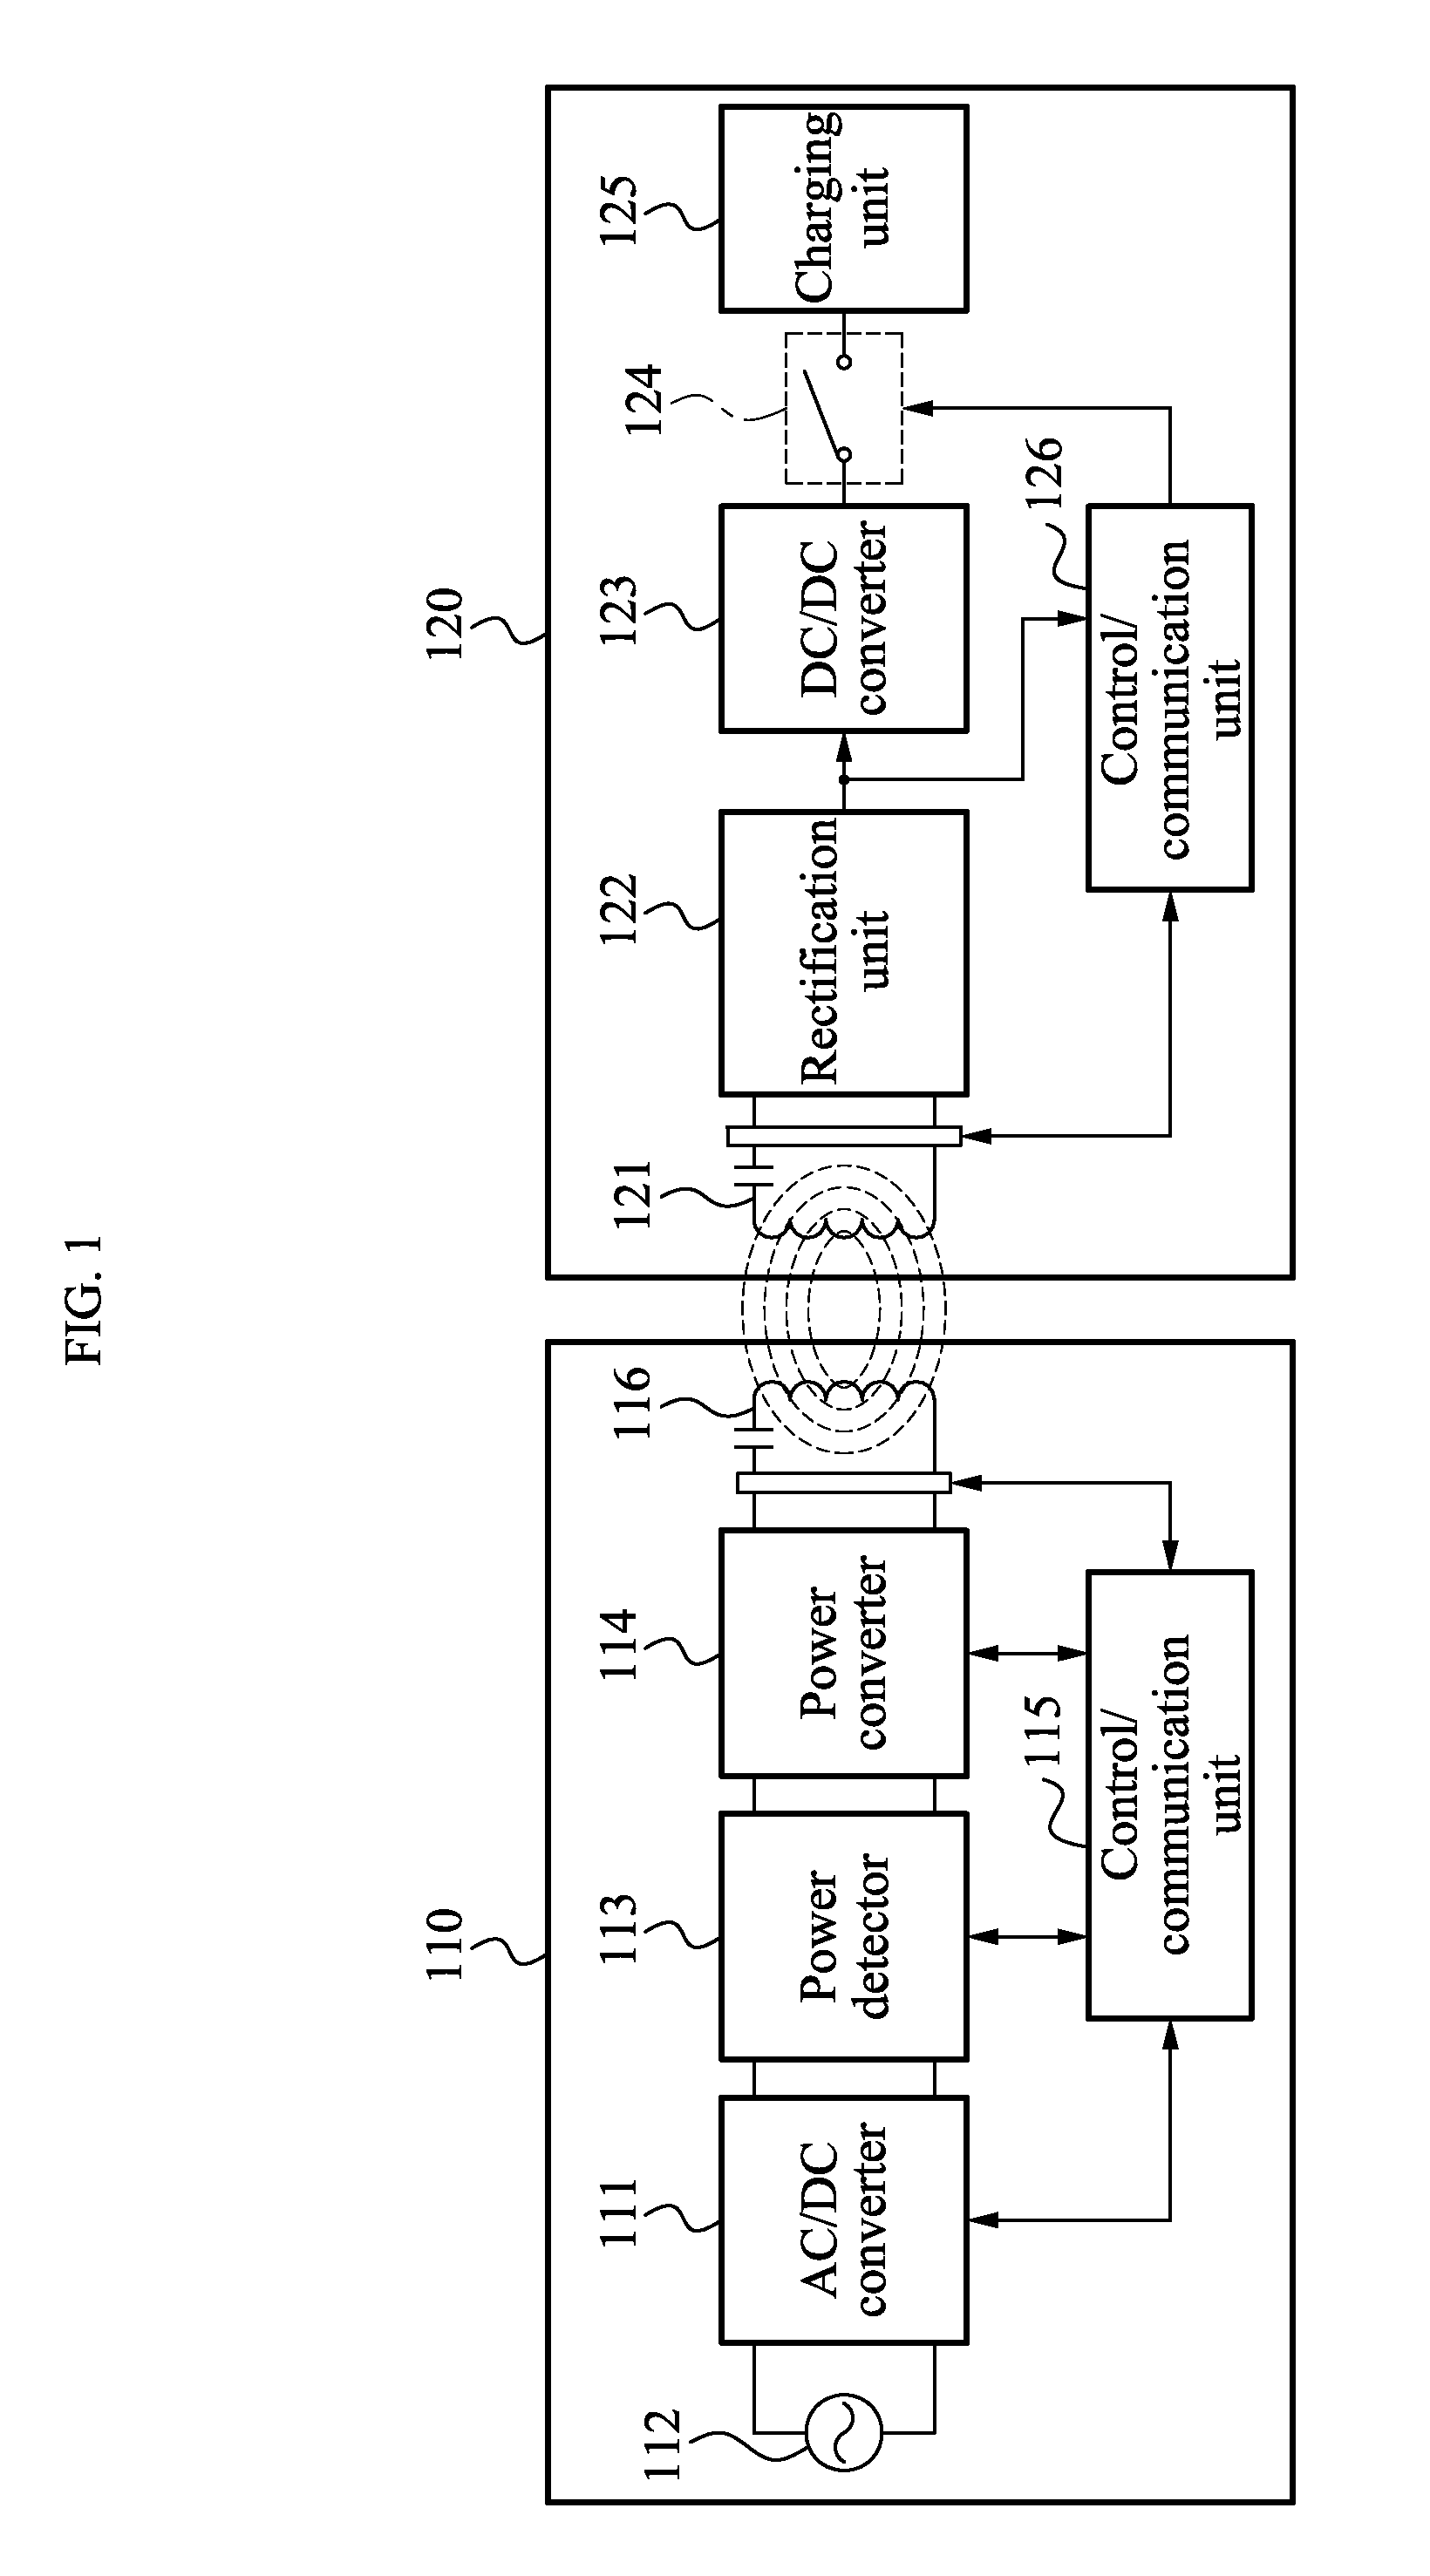 Method and apparatus for data communication in wireless power transmission